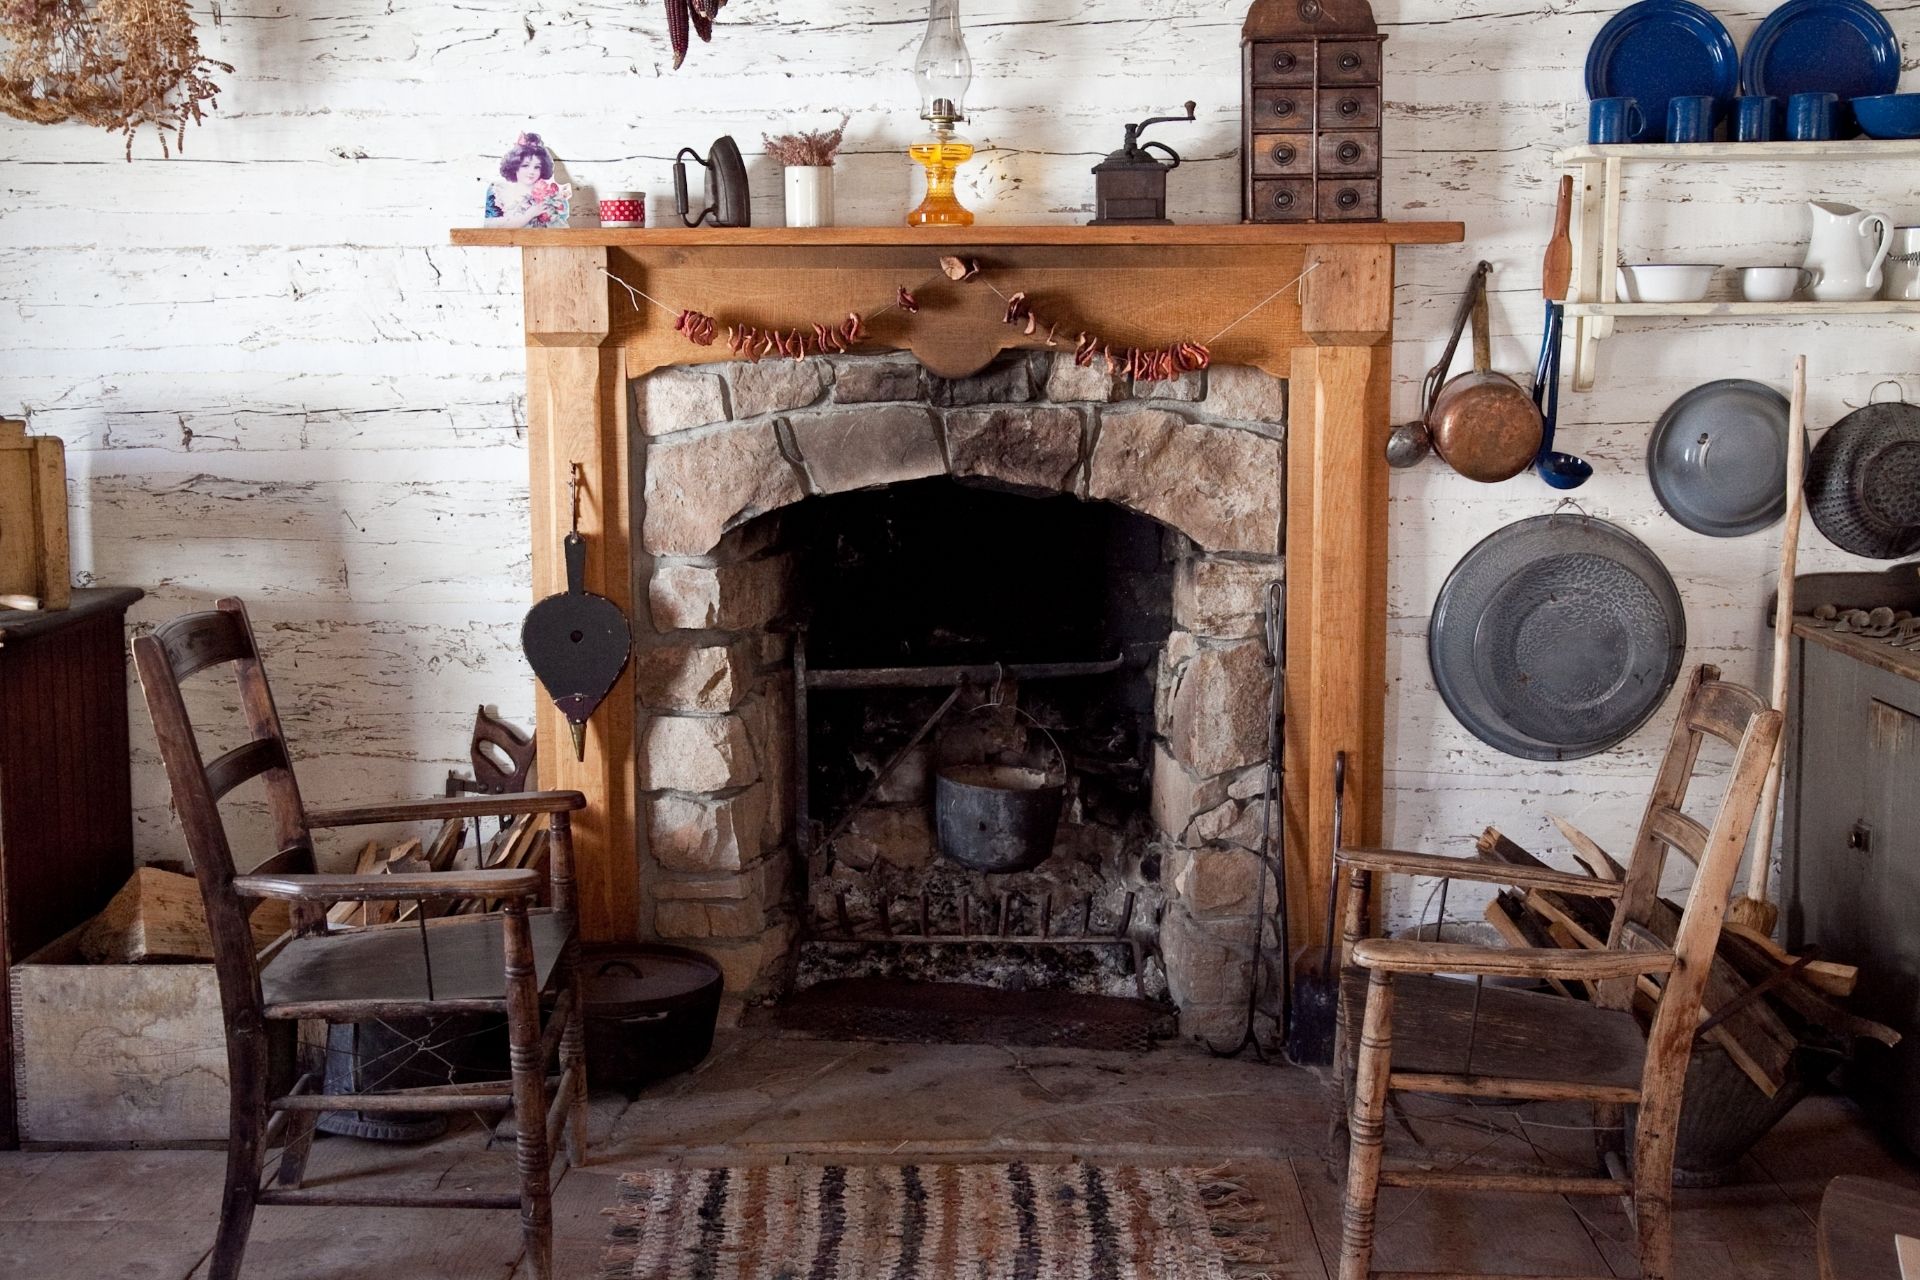 18th century fireplace and wooden chairs